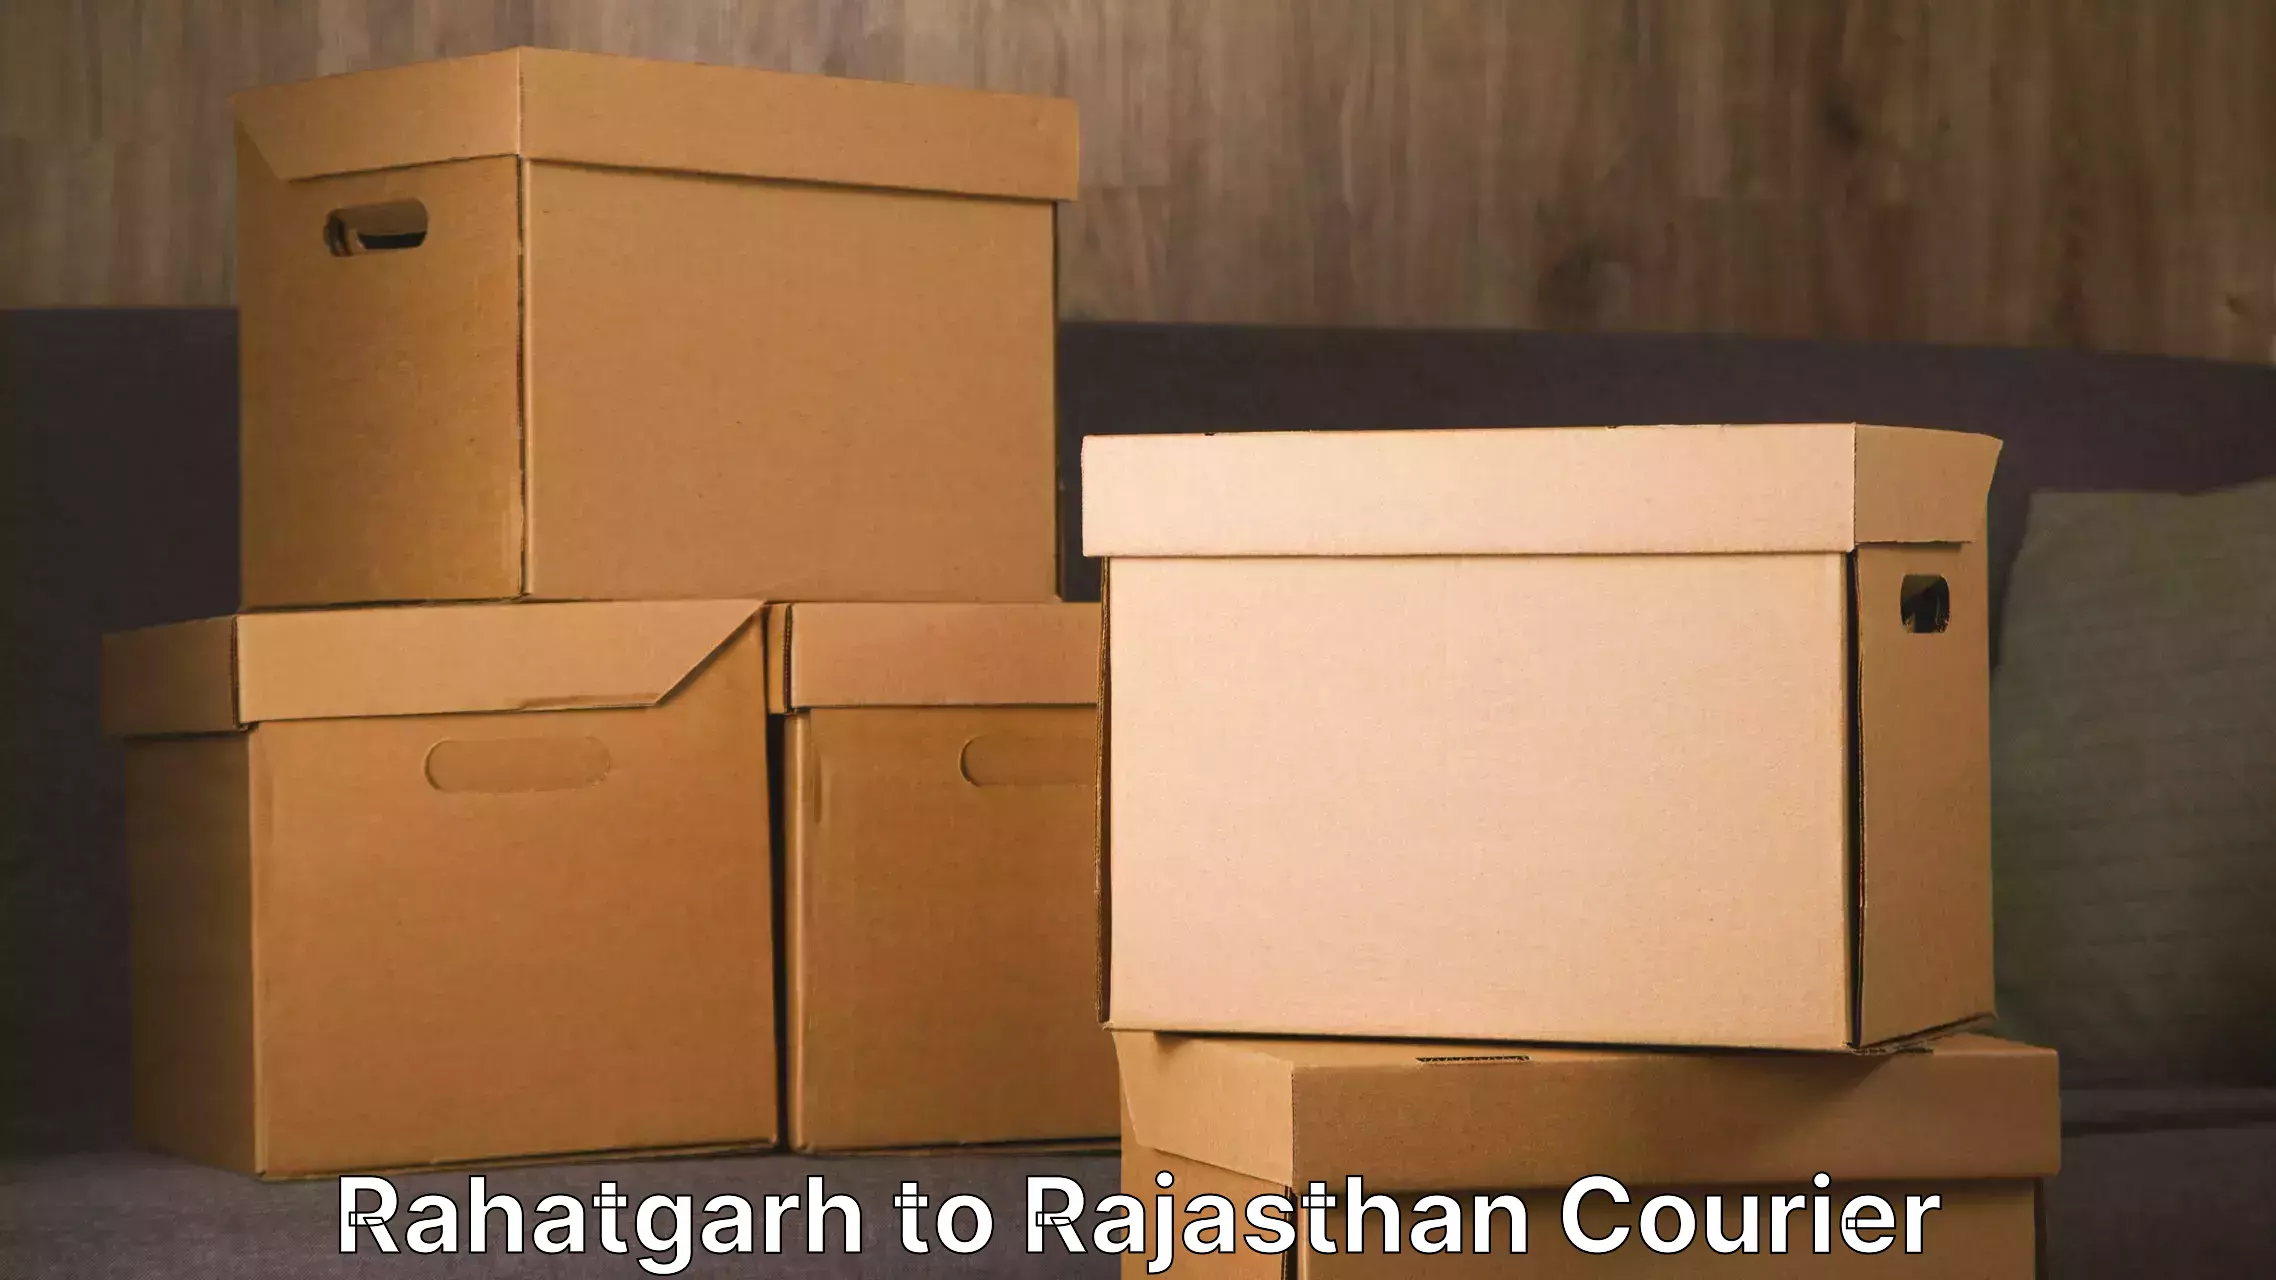 Furniture moving specialists Rahatgarh to Rajasthan